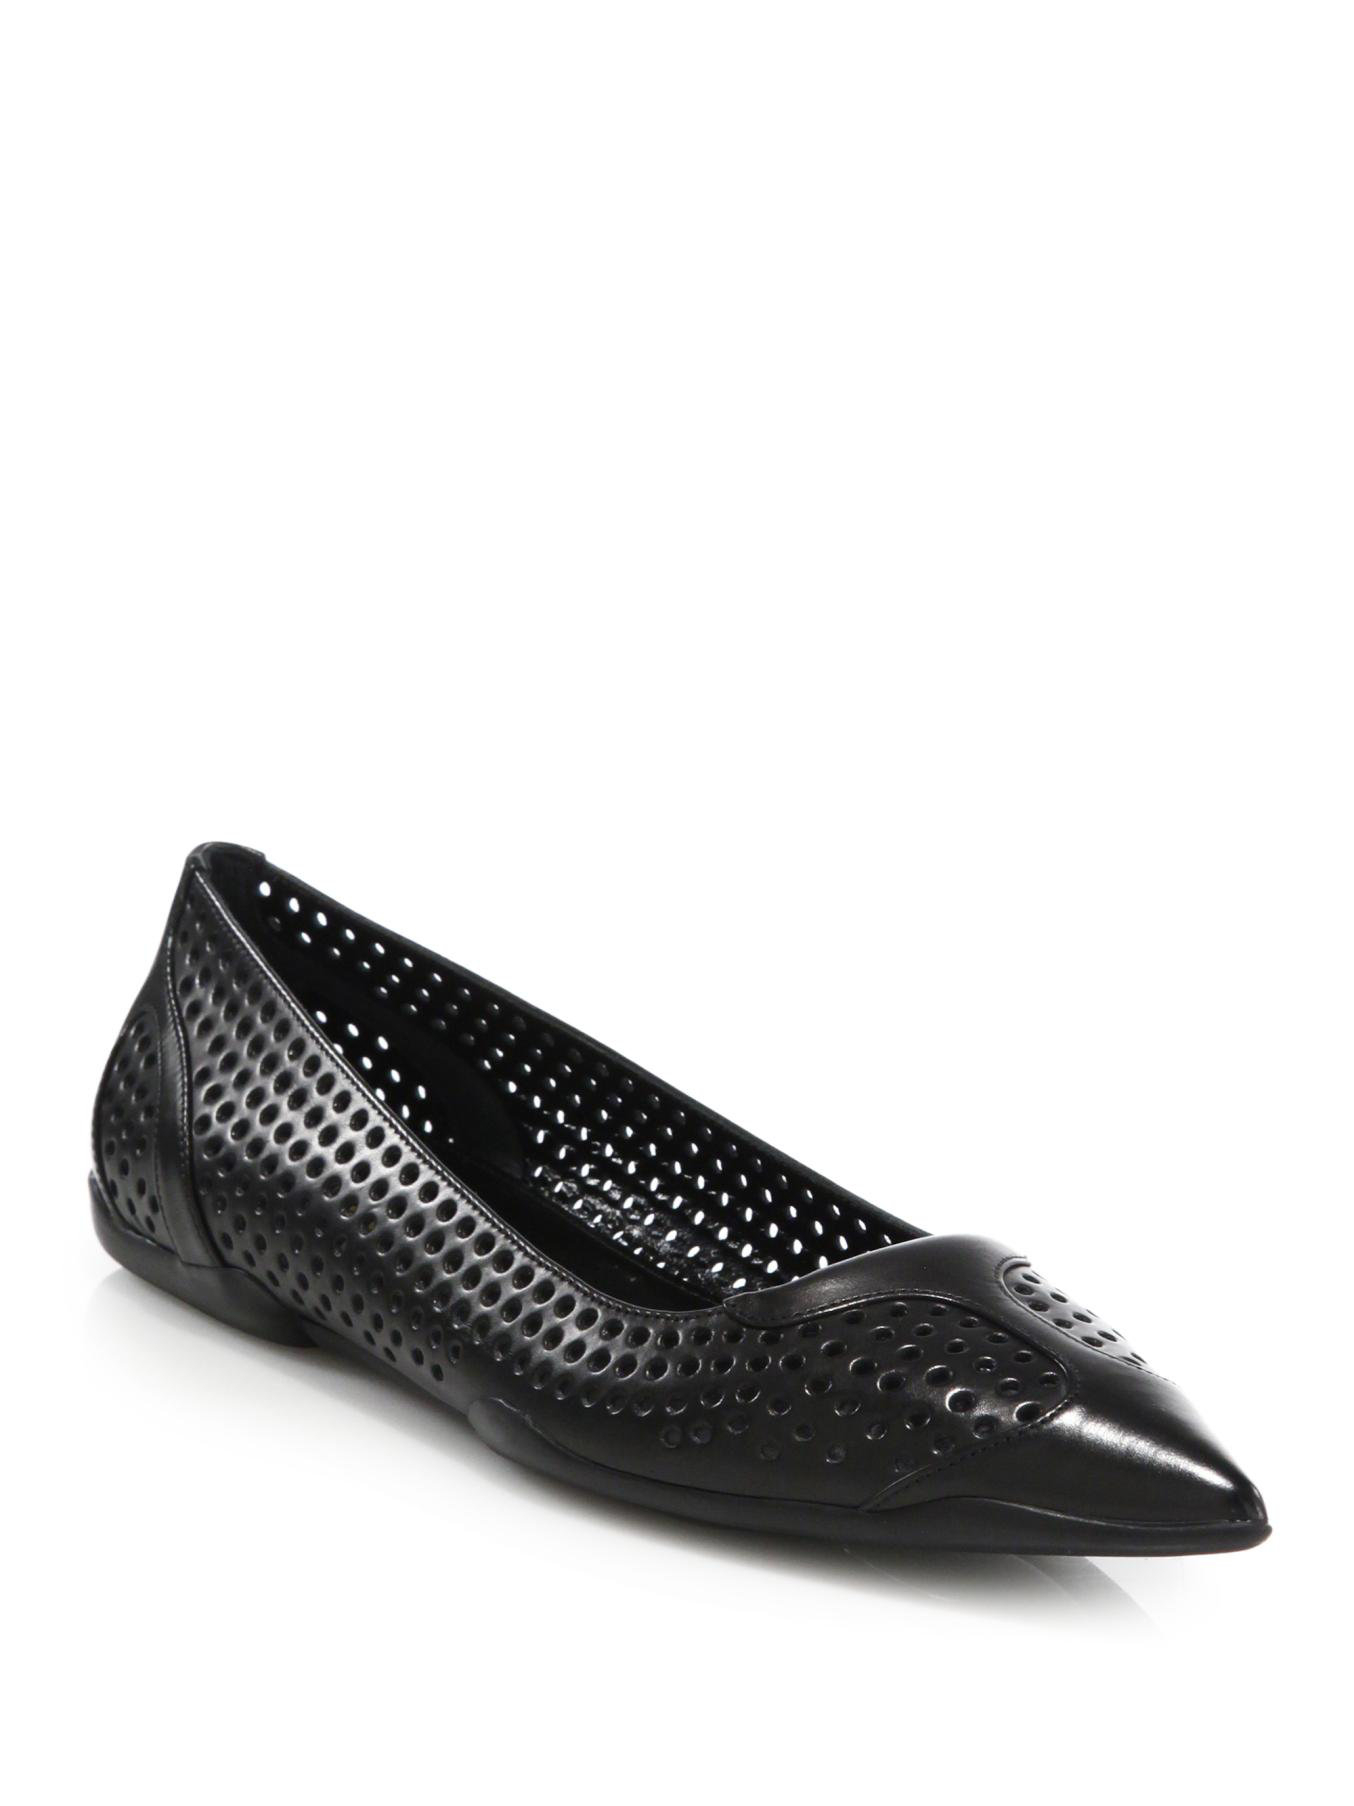 Prada Perforated Leather Point-Toe Flats in Black | Lyst